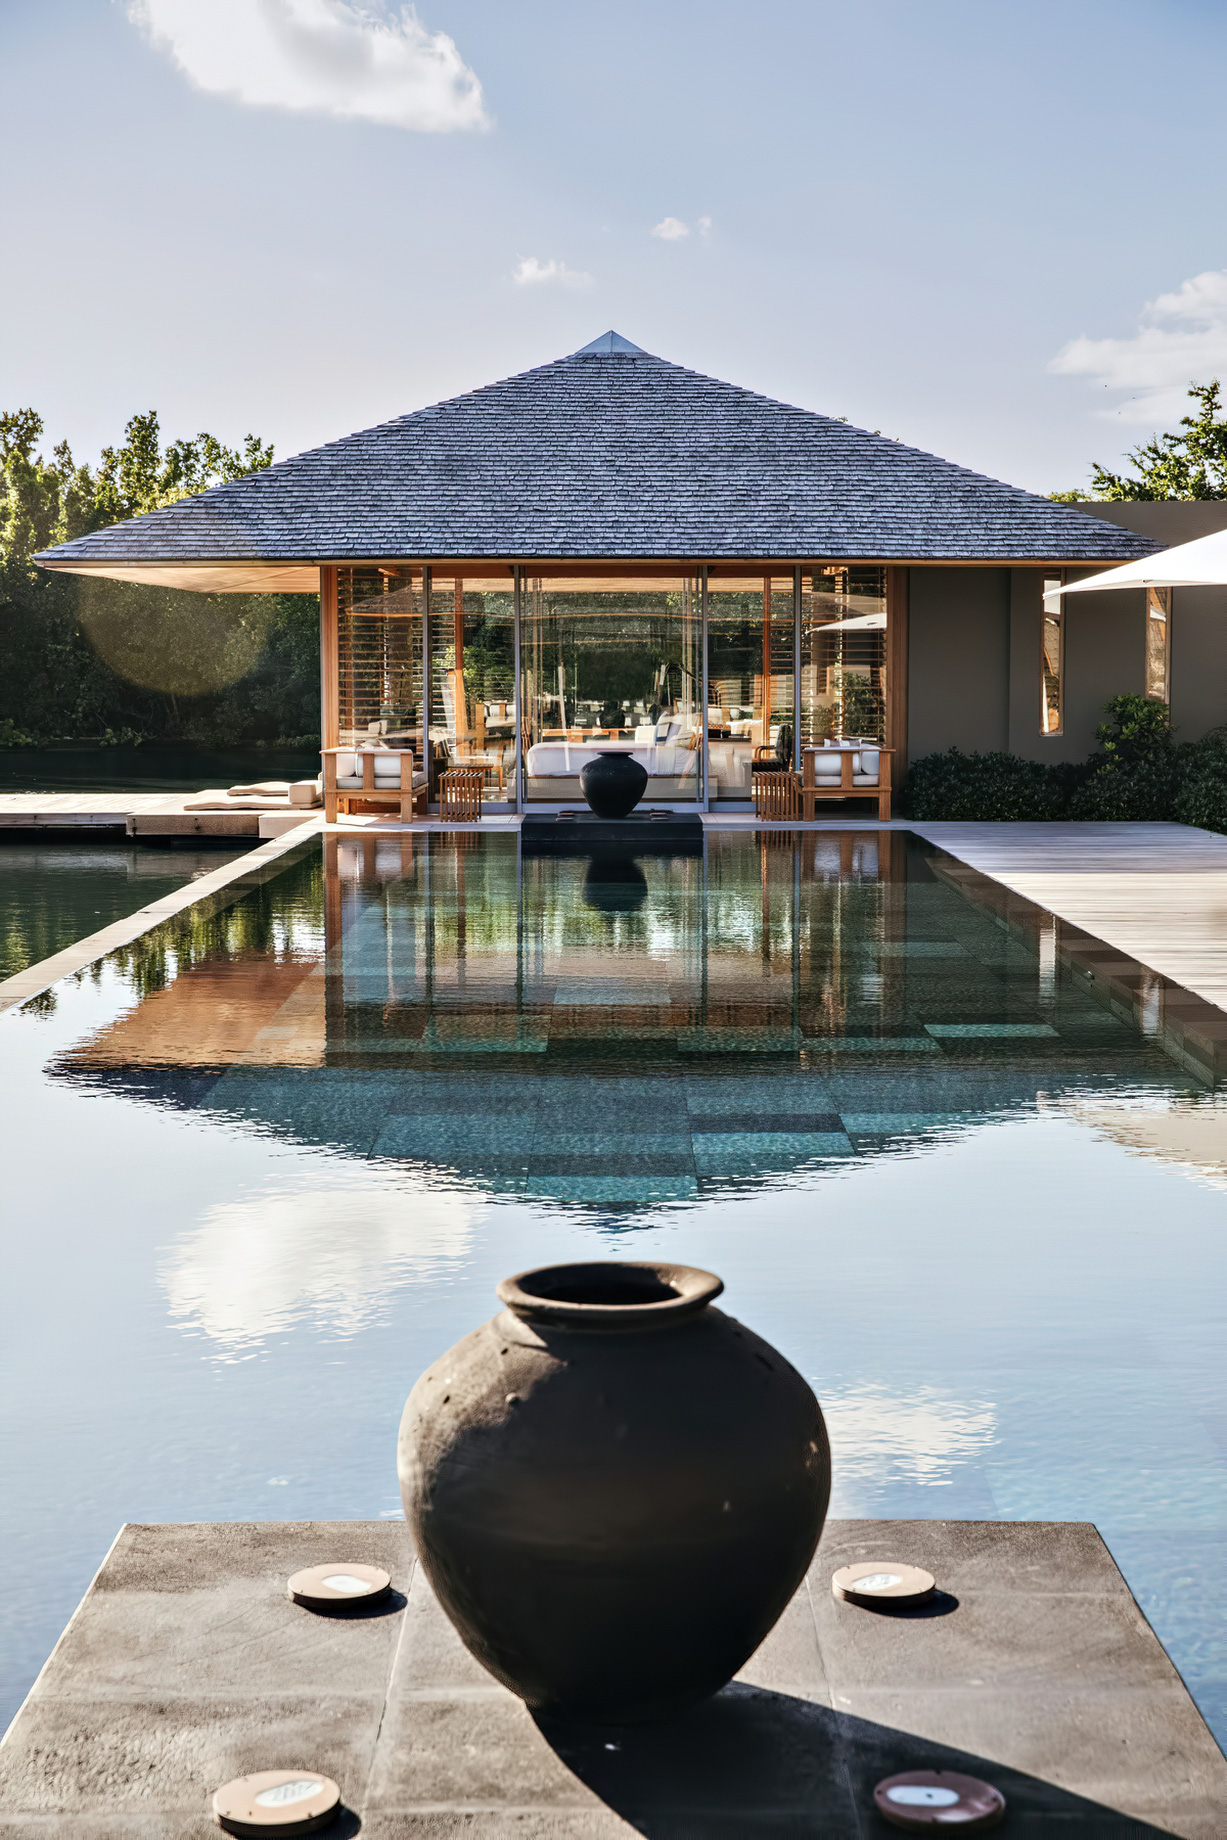 Amanyara Resort – Providenciales, Turks and Caicos Islands – Rejuvenation and Relaxation